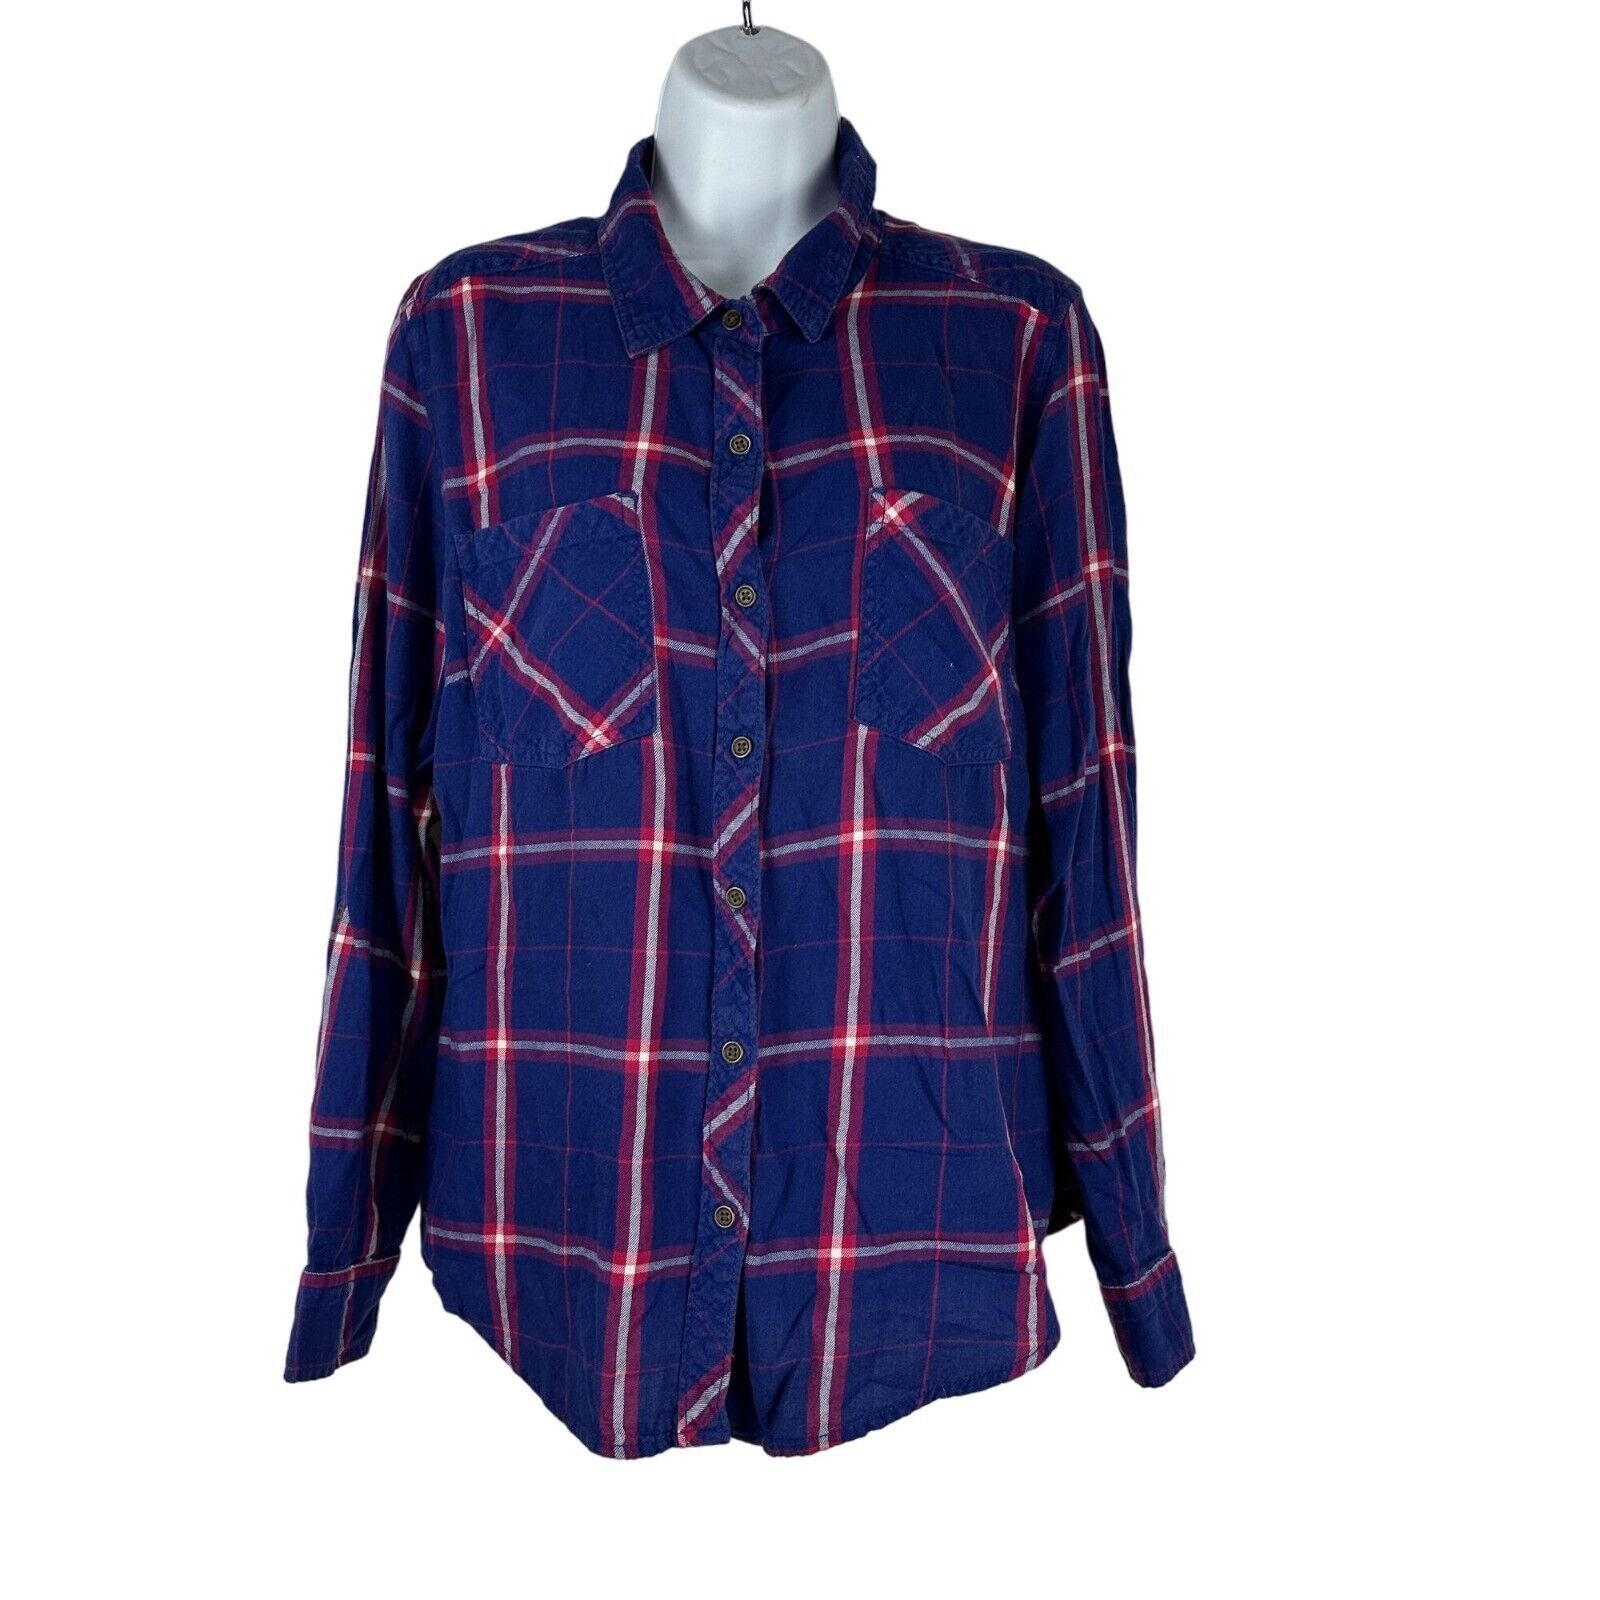 Primary image for Faded Glory Youth Girls Plaid Long Sleeved Button Down Shirt Size L(12-14)